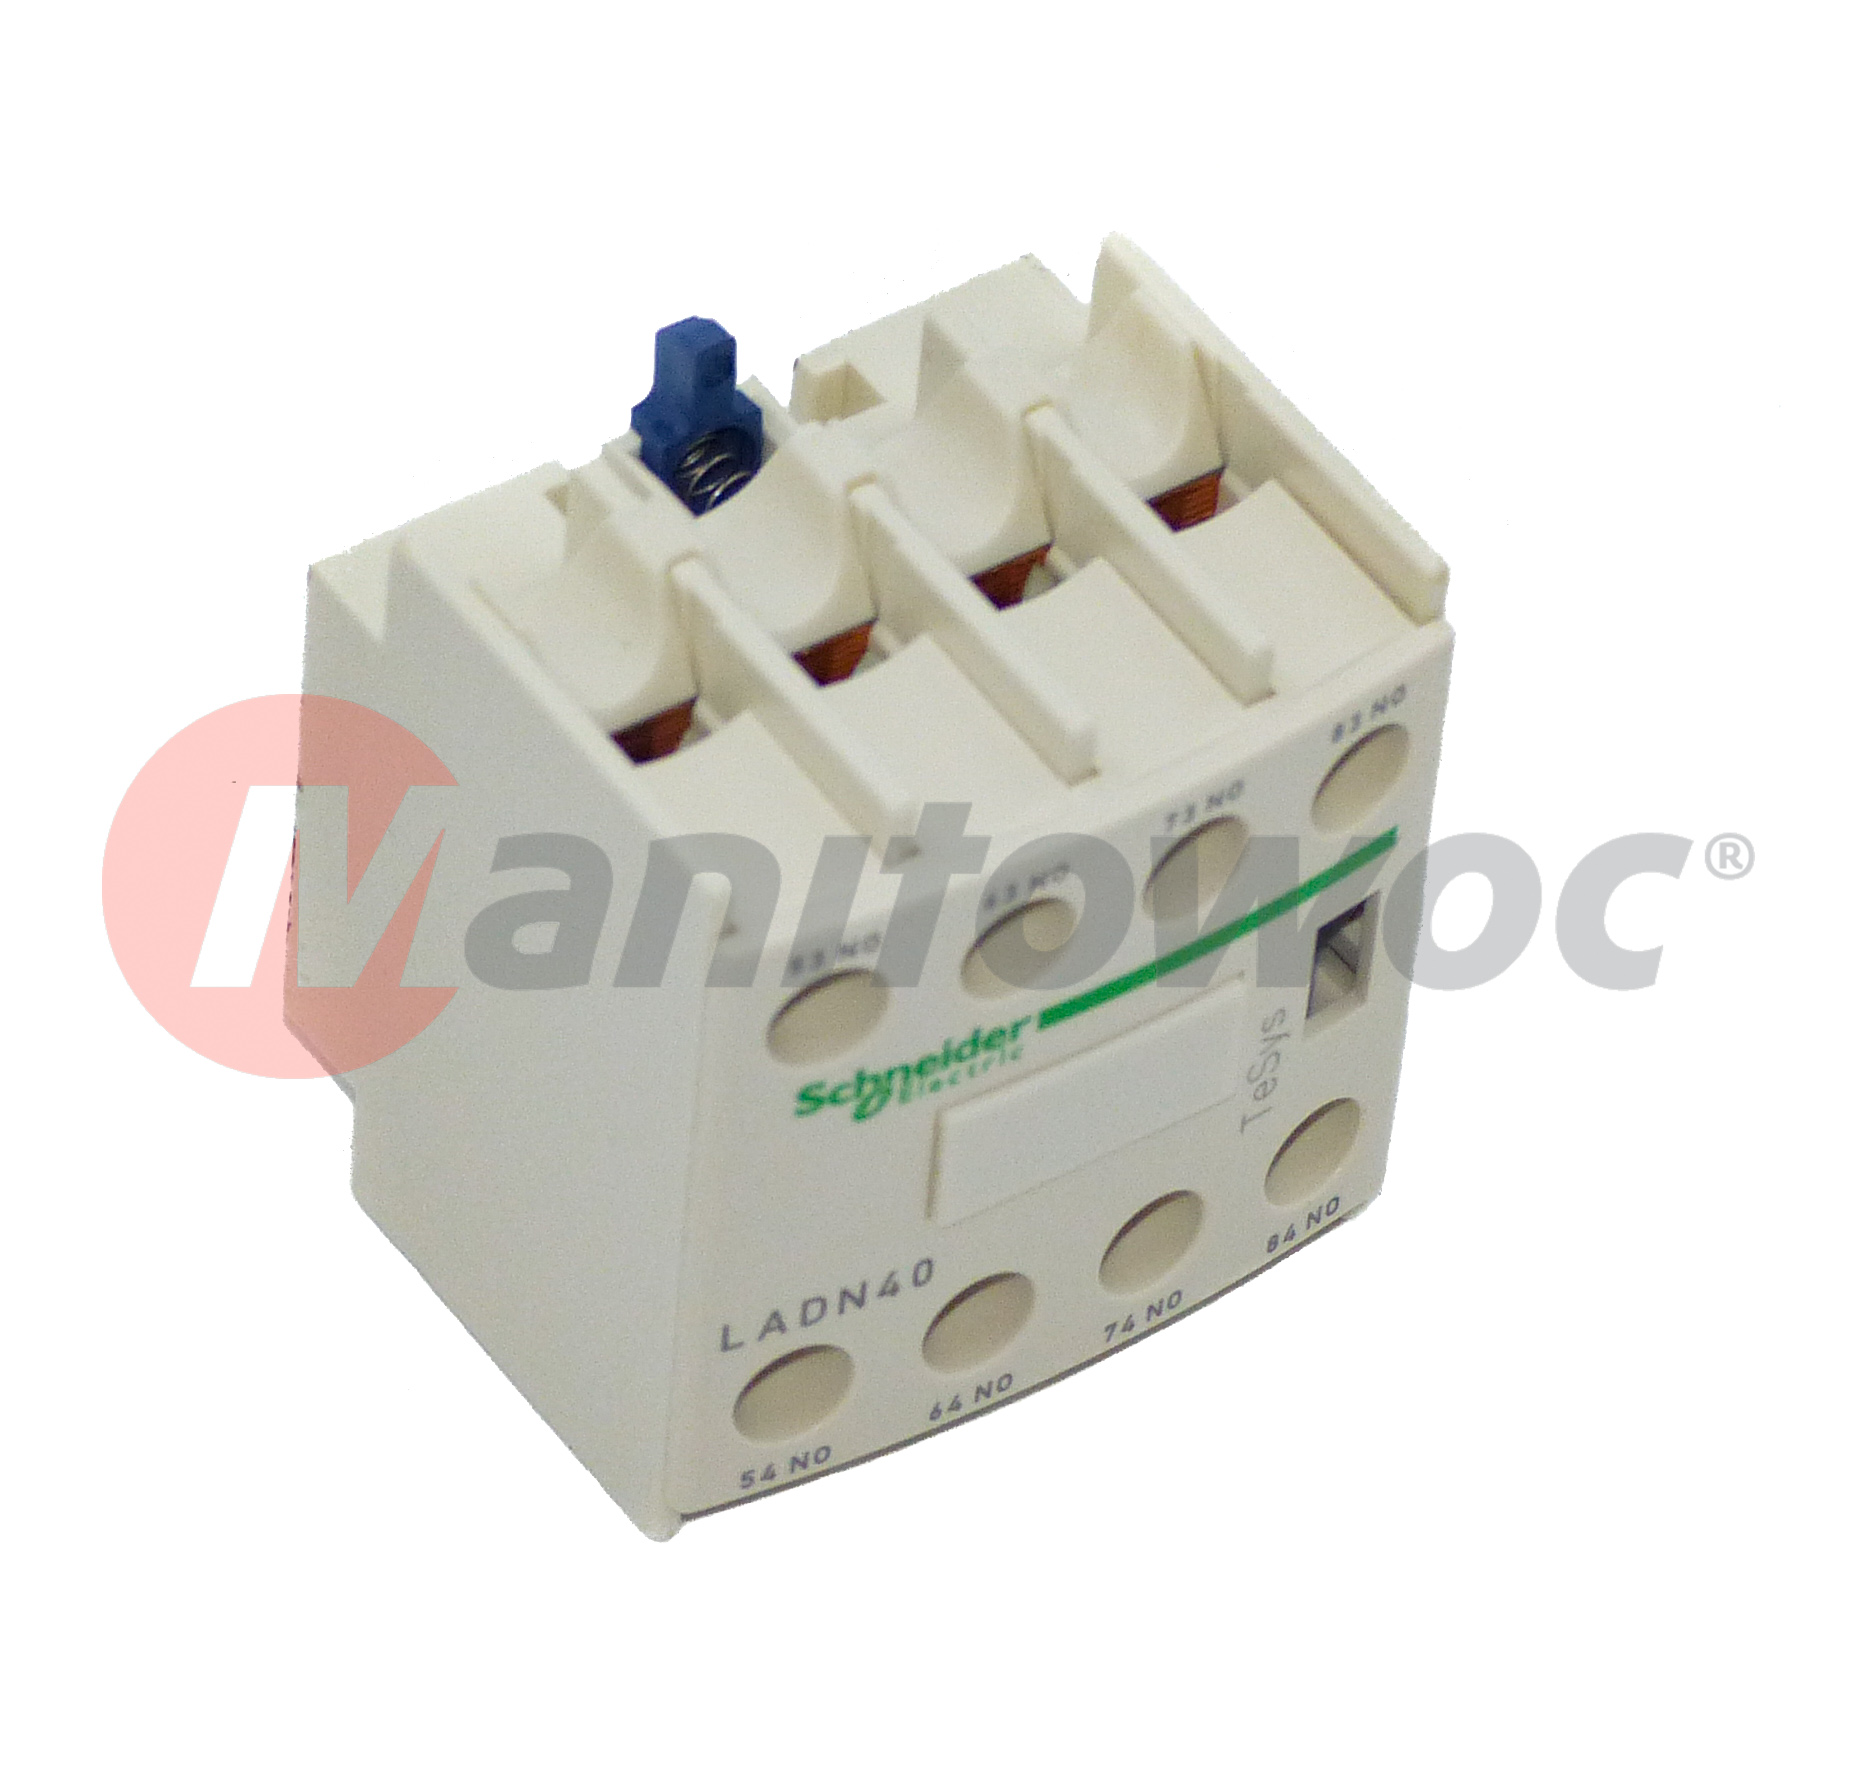 G-11411-97 - "AUXILIARY BLOCK|3F+10 FRONT"